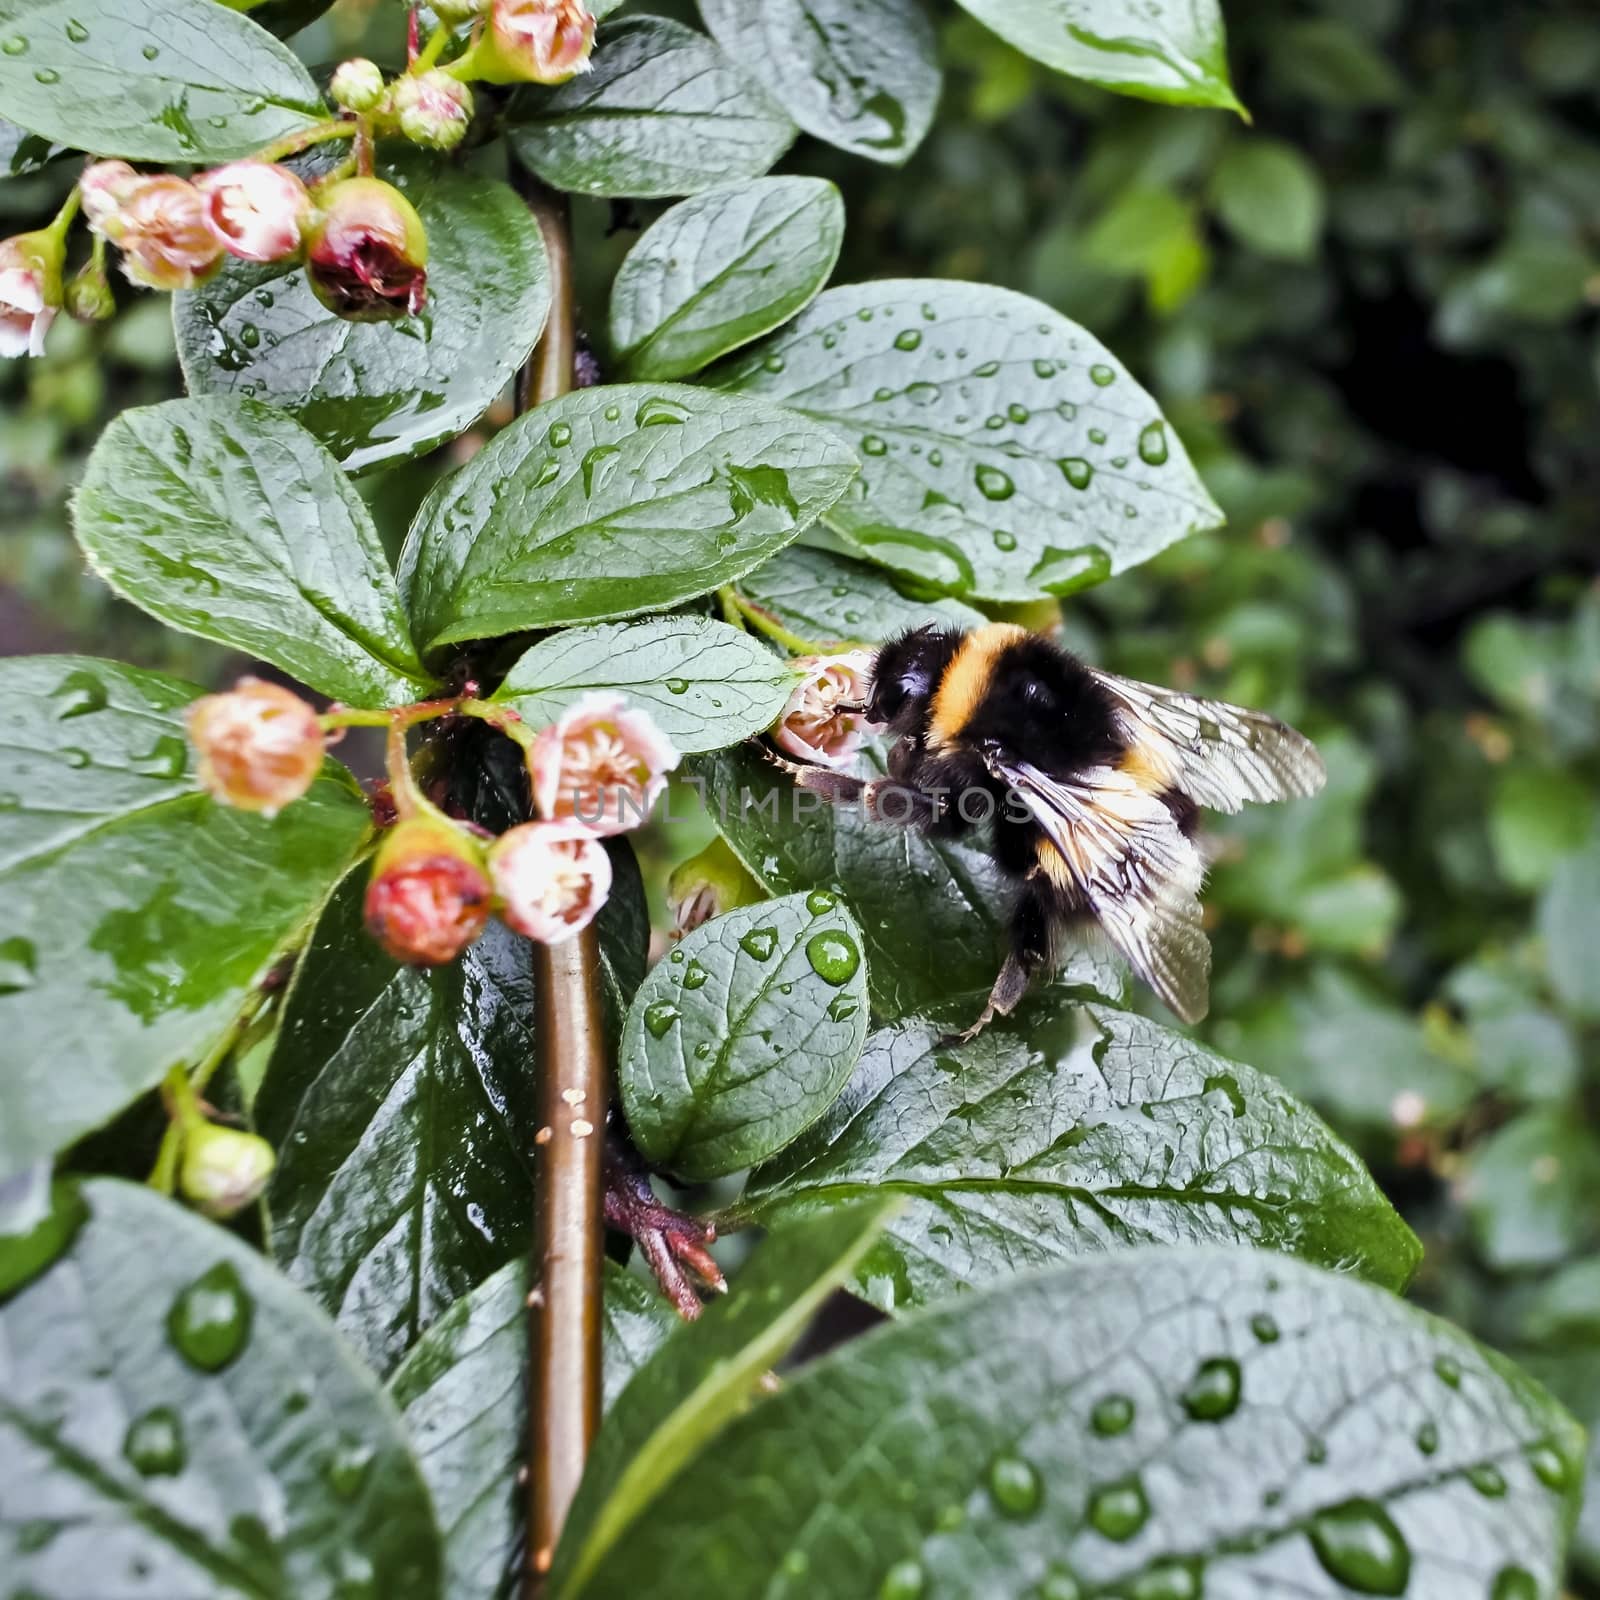 bumblebee collects nectar after the rain on wet Bush in early morning